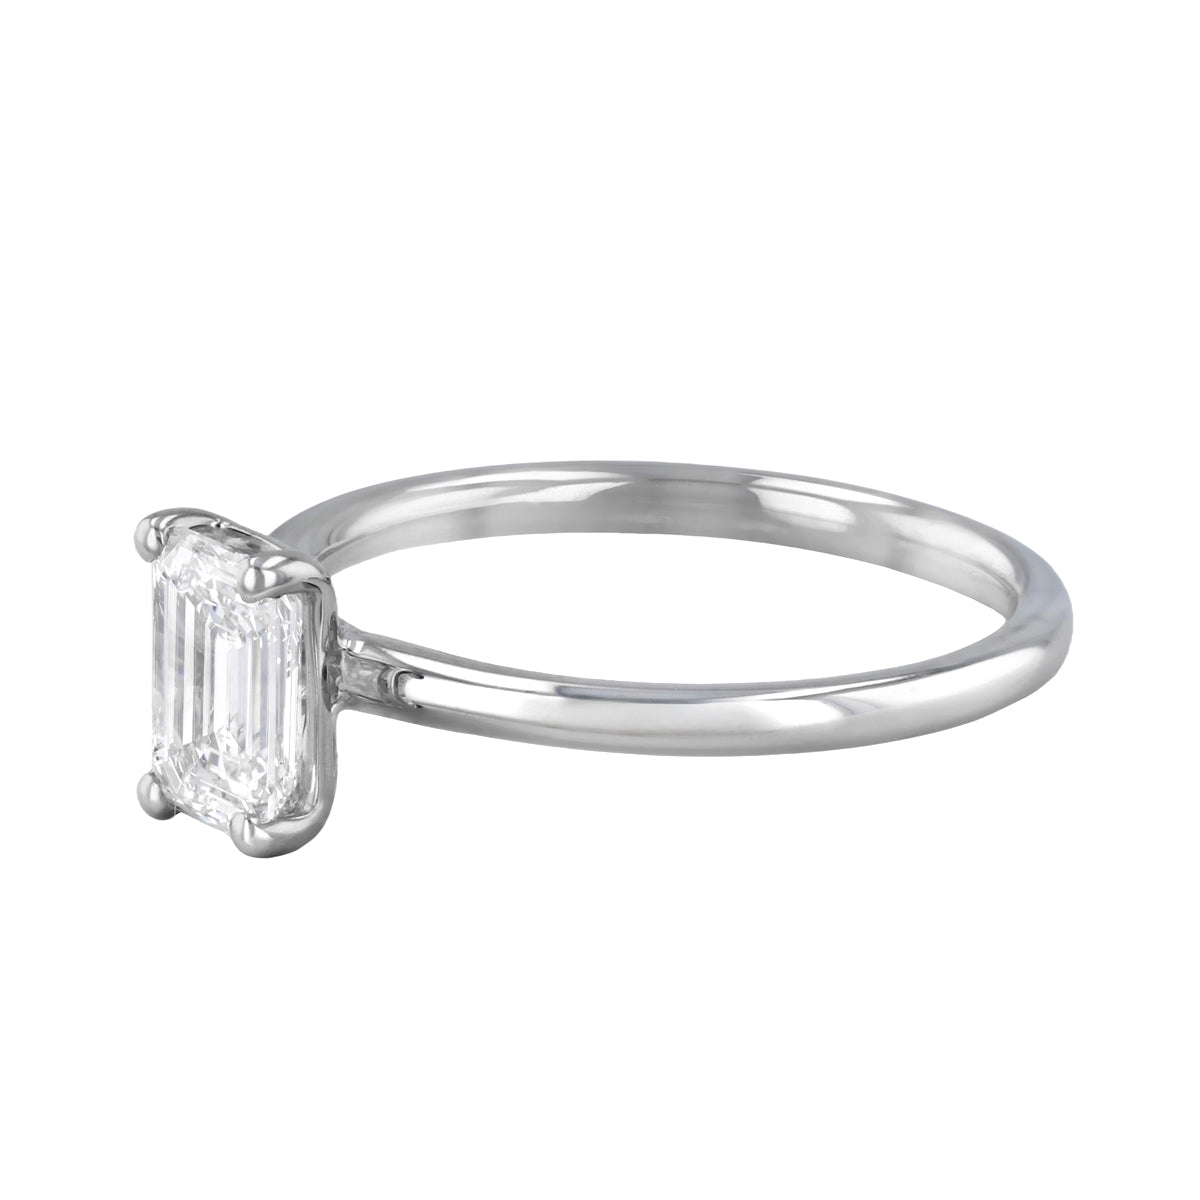 0-50ct-sofia-emerald-cut-solitaire-diamond-engagement-ring-18ct-white-gold